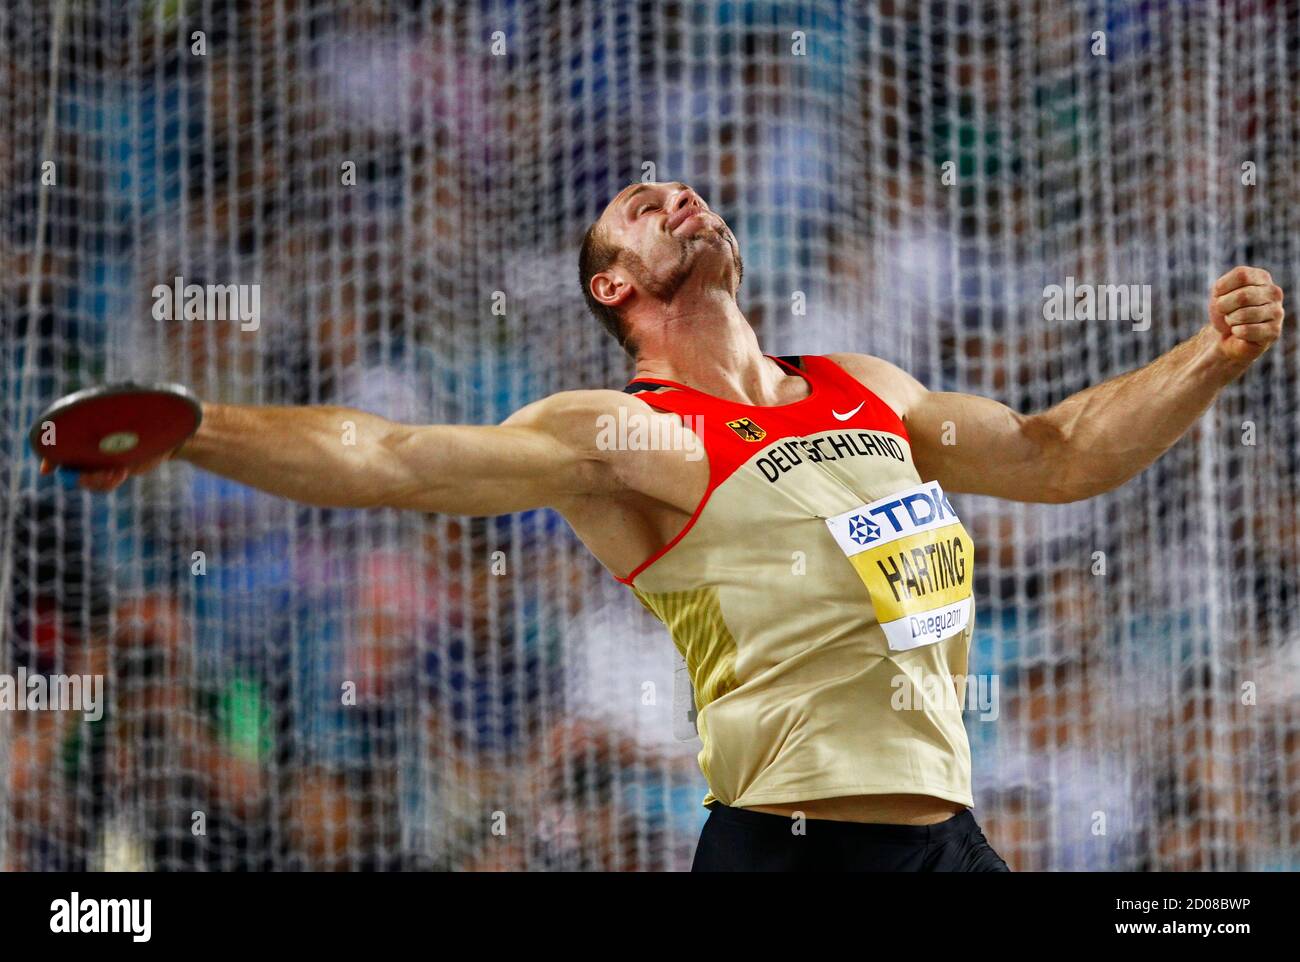 Robert Harting of Germany competes in the men's discus throw final at the  IAAF World Championships in Daegu August 30, 2011. REUTERS/Kai Pfaffenbach  (SOUTH KOREA - Tags: SPORT ATHLETICS Stock Photo - Alamy